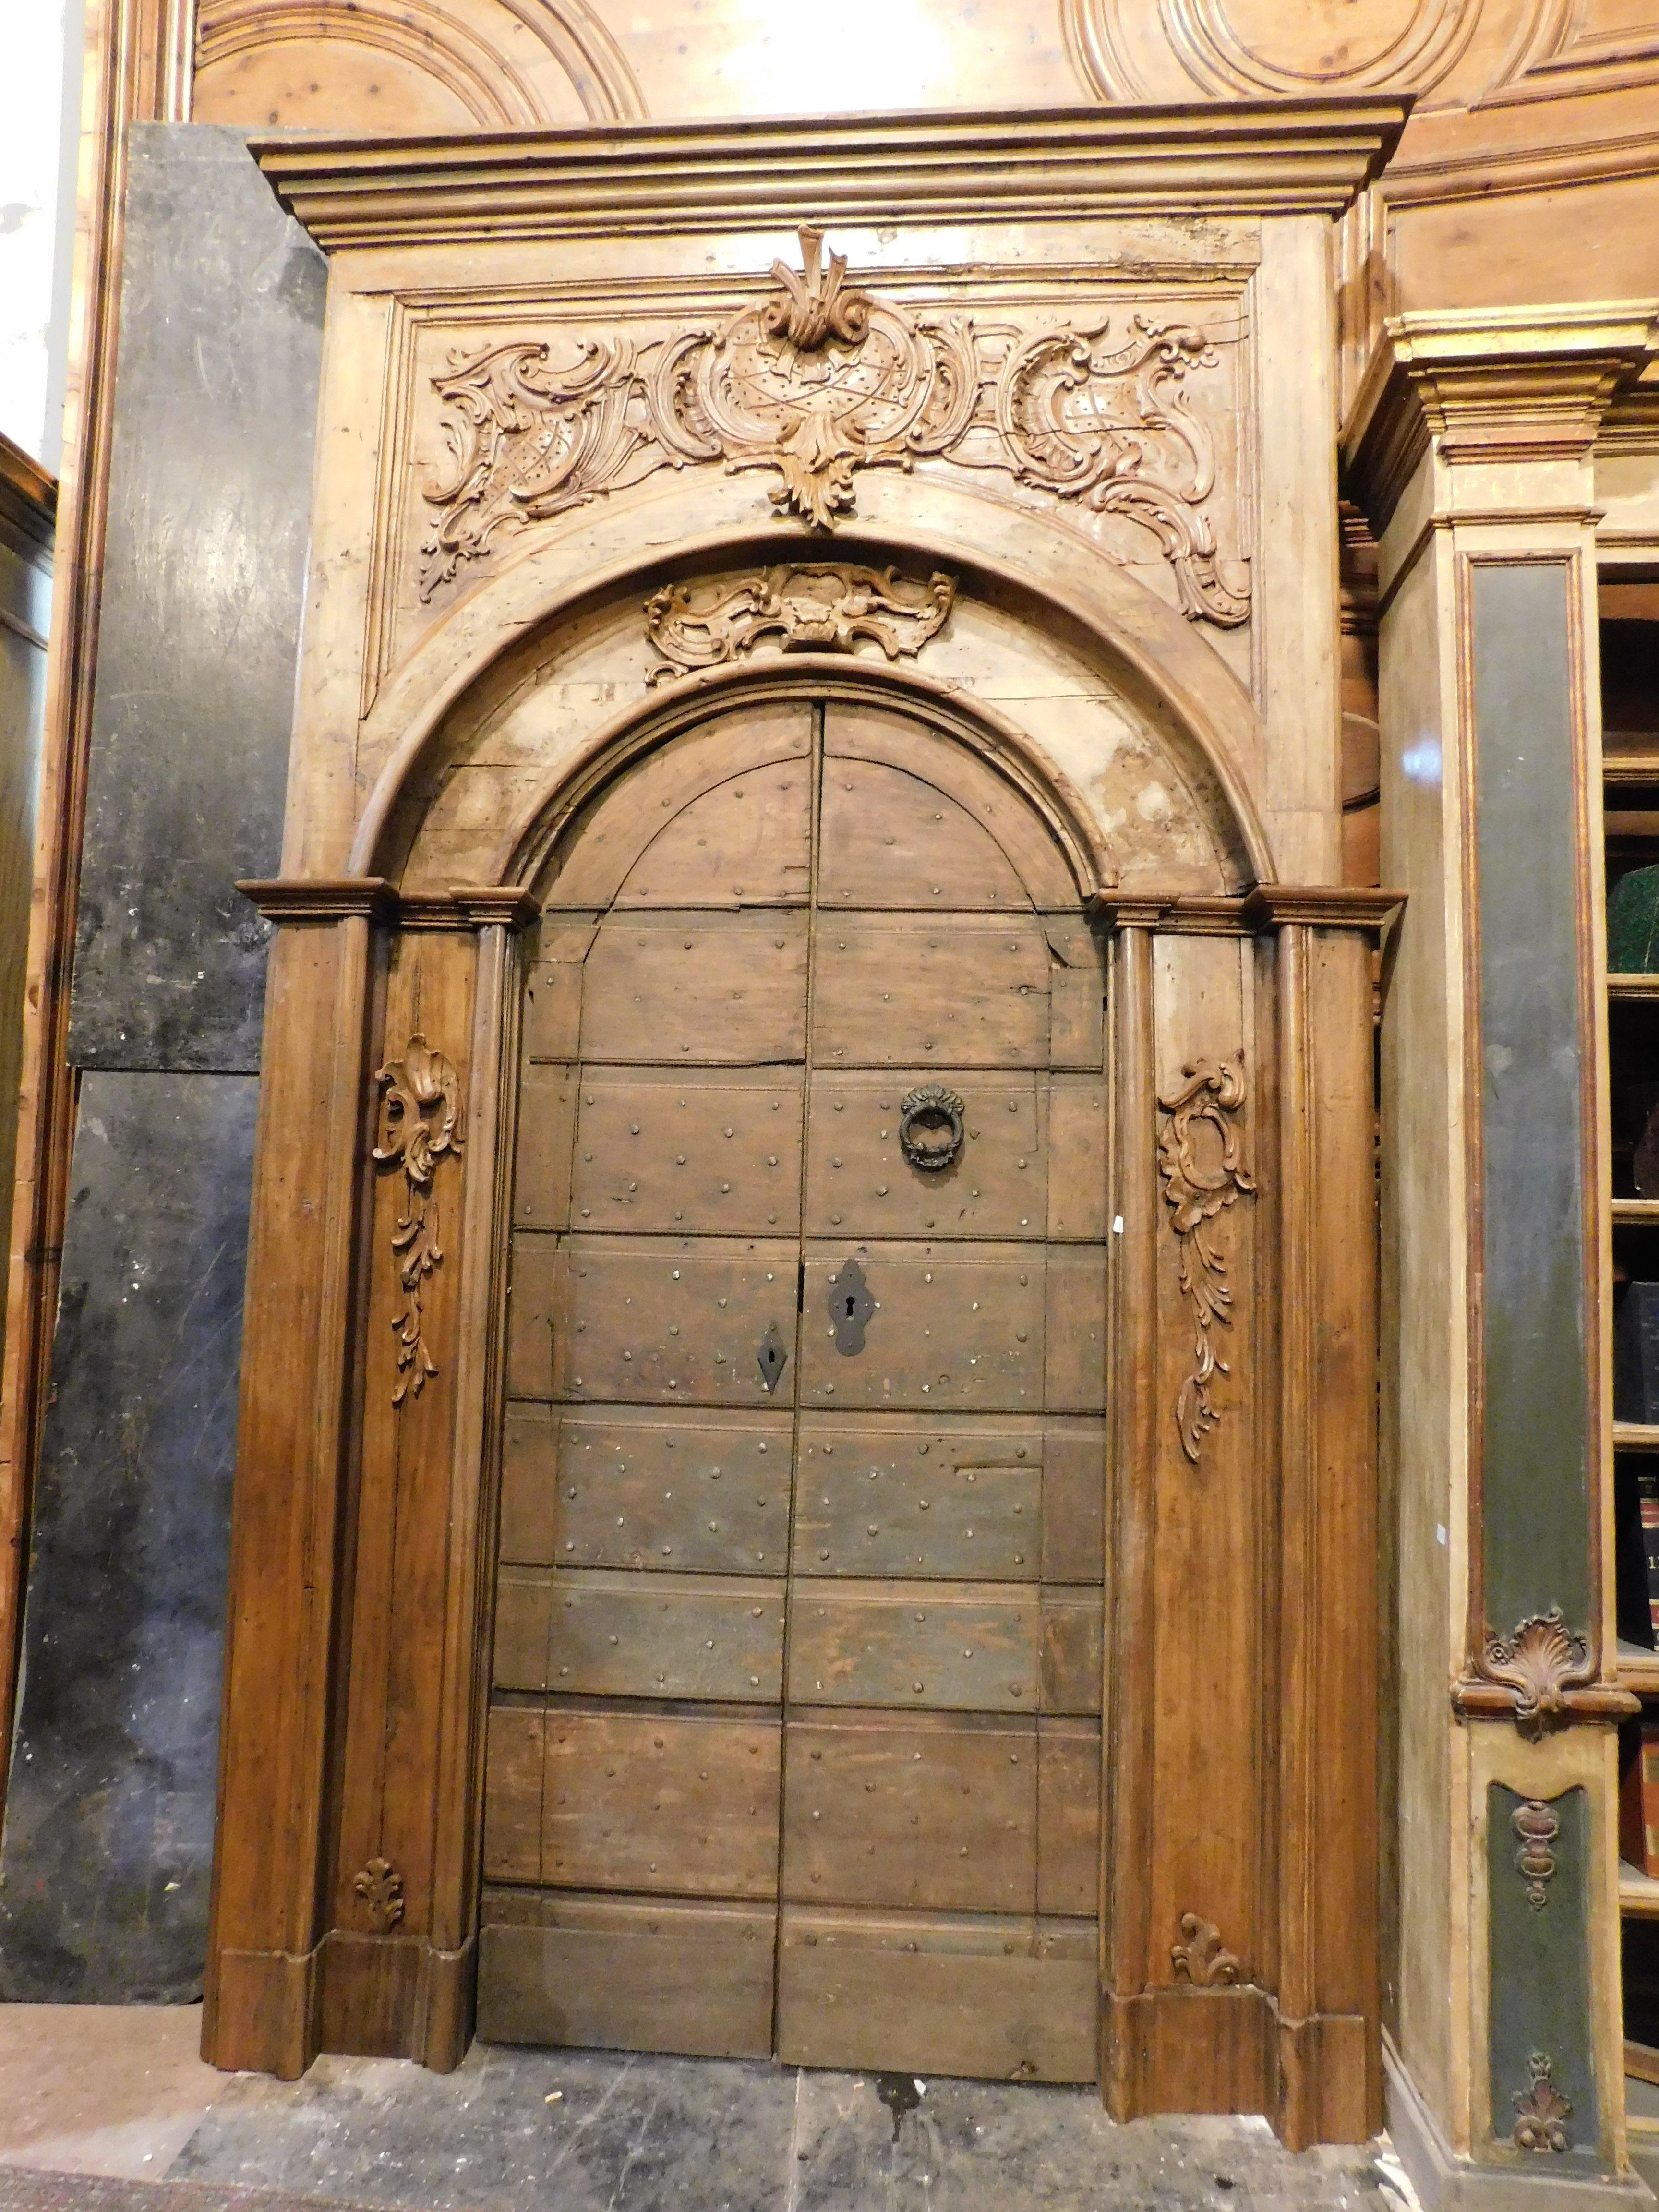 Ancient entrance door, main door in poplar, finished with nails, rustic and curved in the upper part, built in Italy in the 18th century, mounts wall hinges for push opening, currently located inside the beautiful portal in the photo, has dimensions